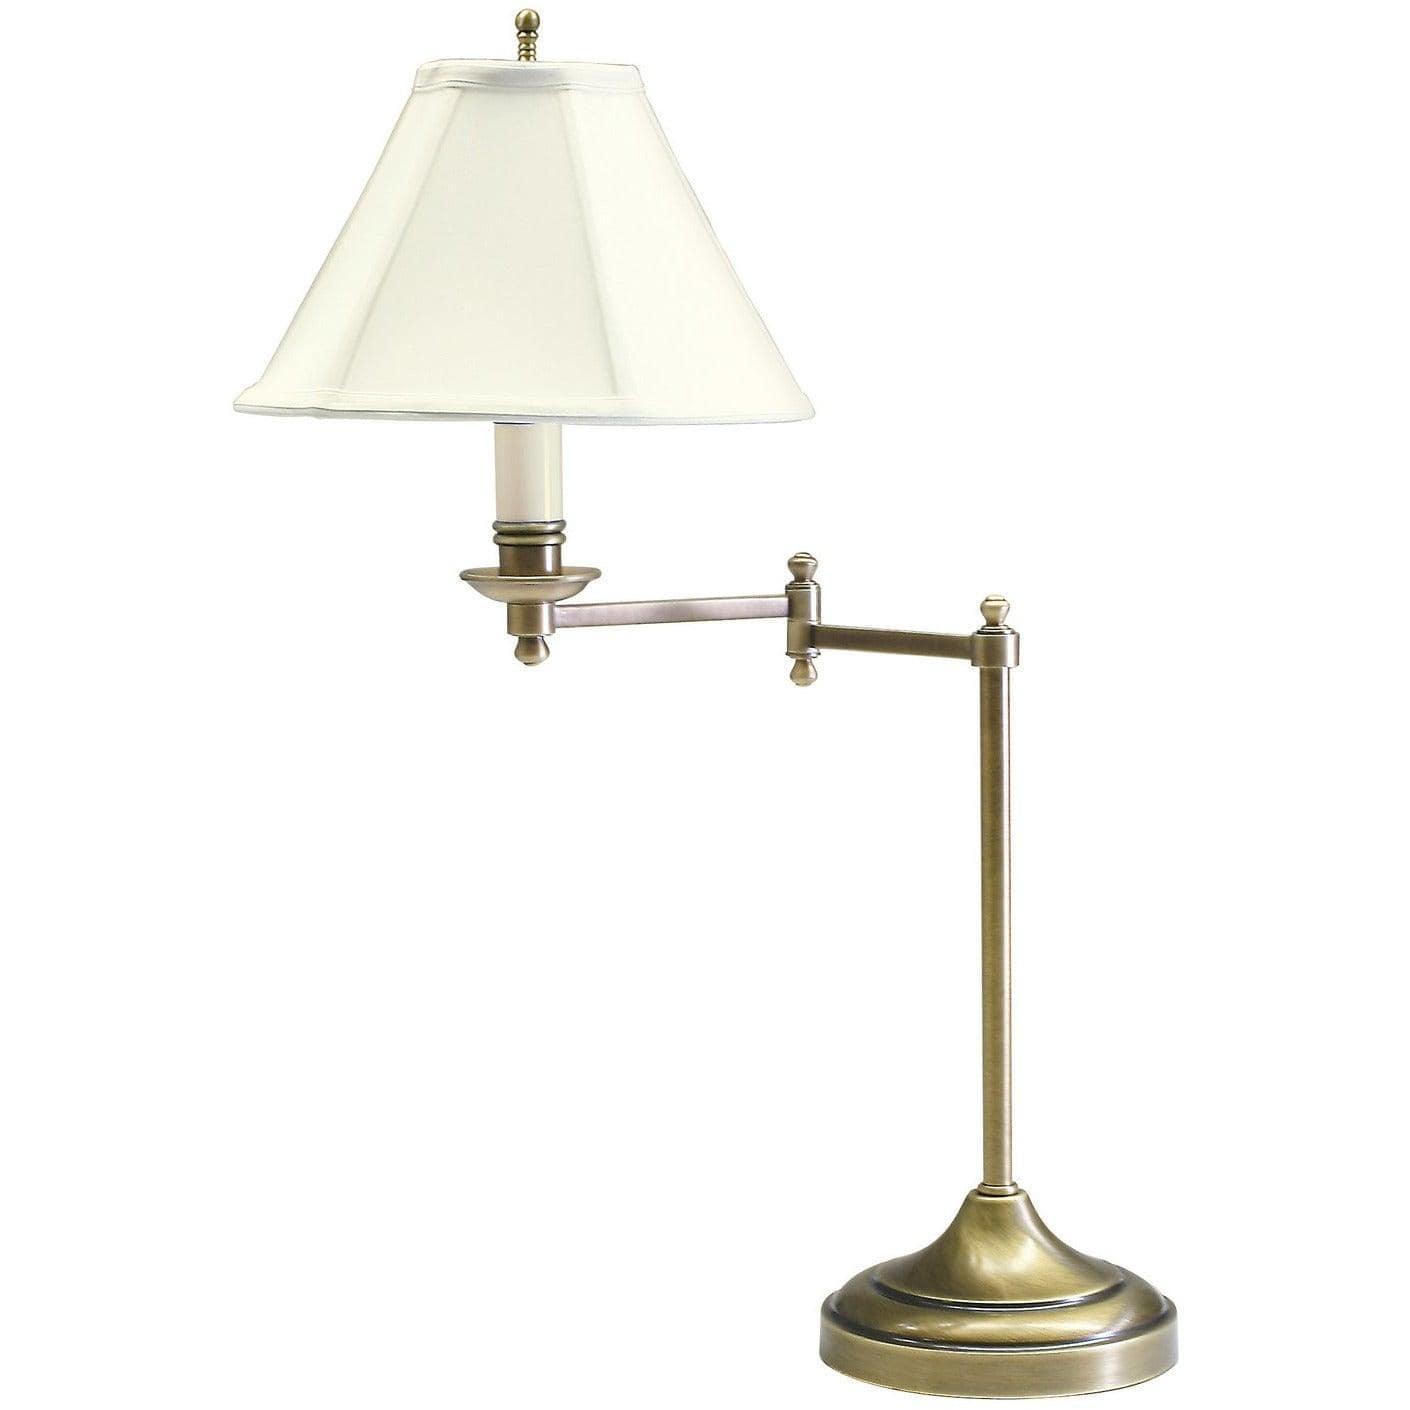 House of Troy - Club One Light Table Lamp - CL251-AB | Montreal Lighting & Hardware